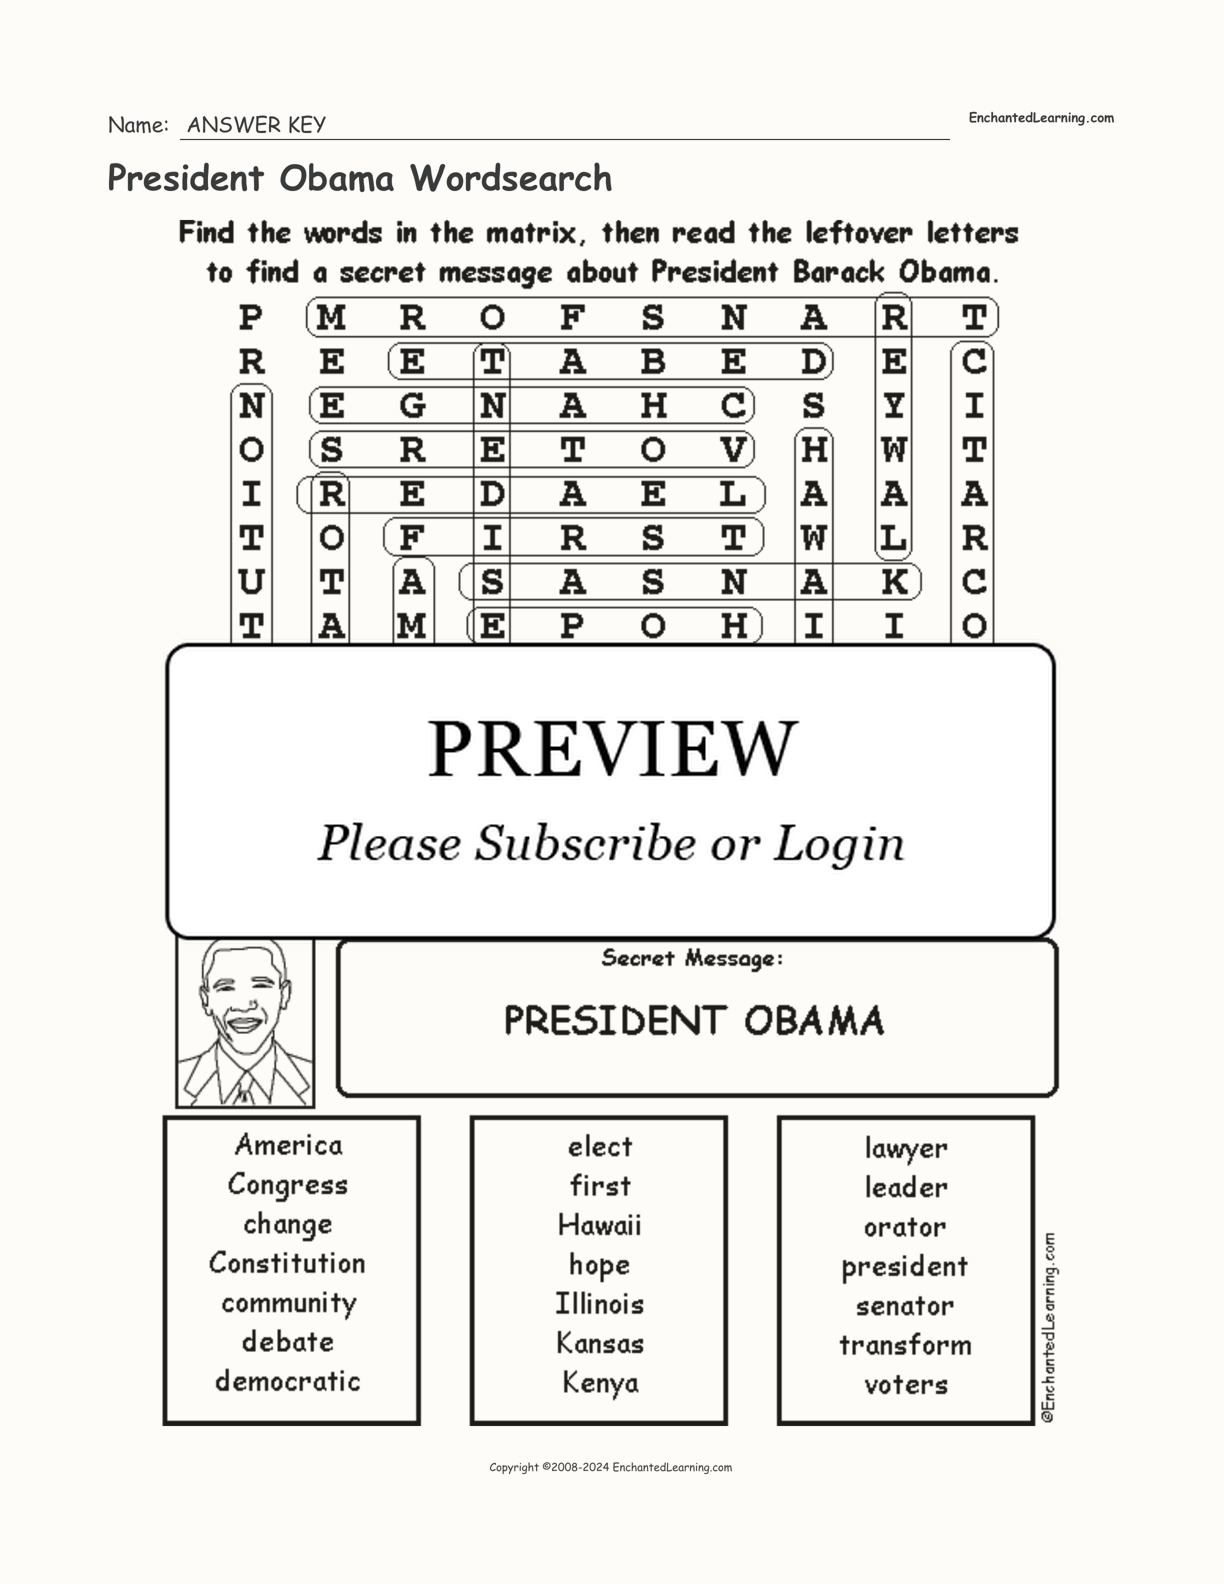 President Obama Wordsearch interactive worksheet page 2